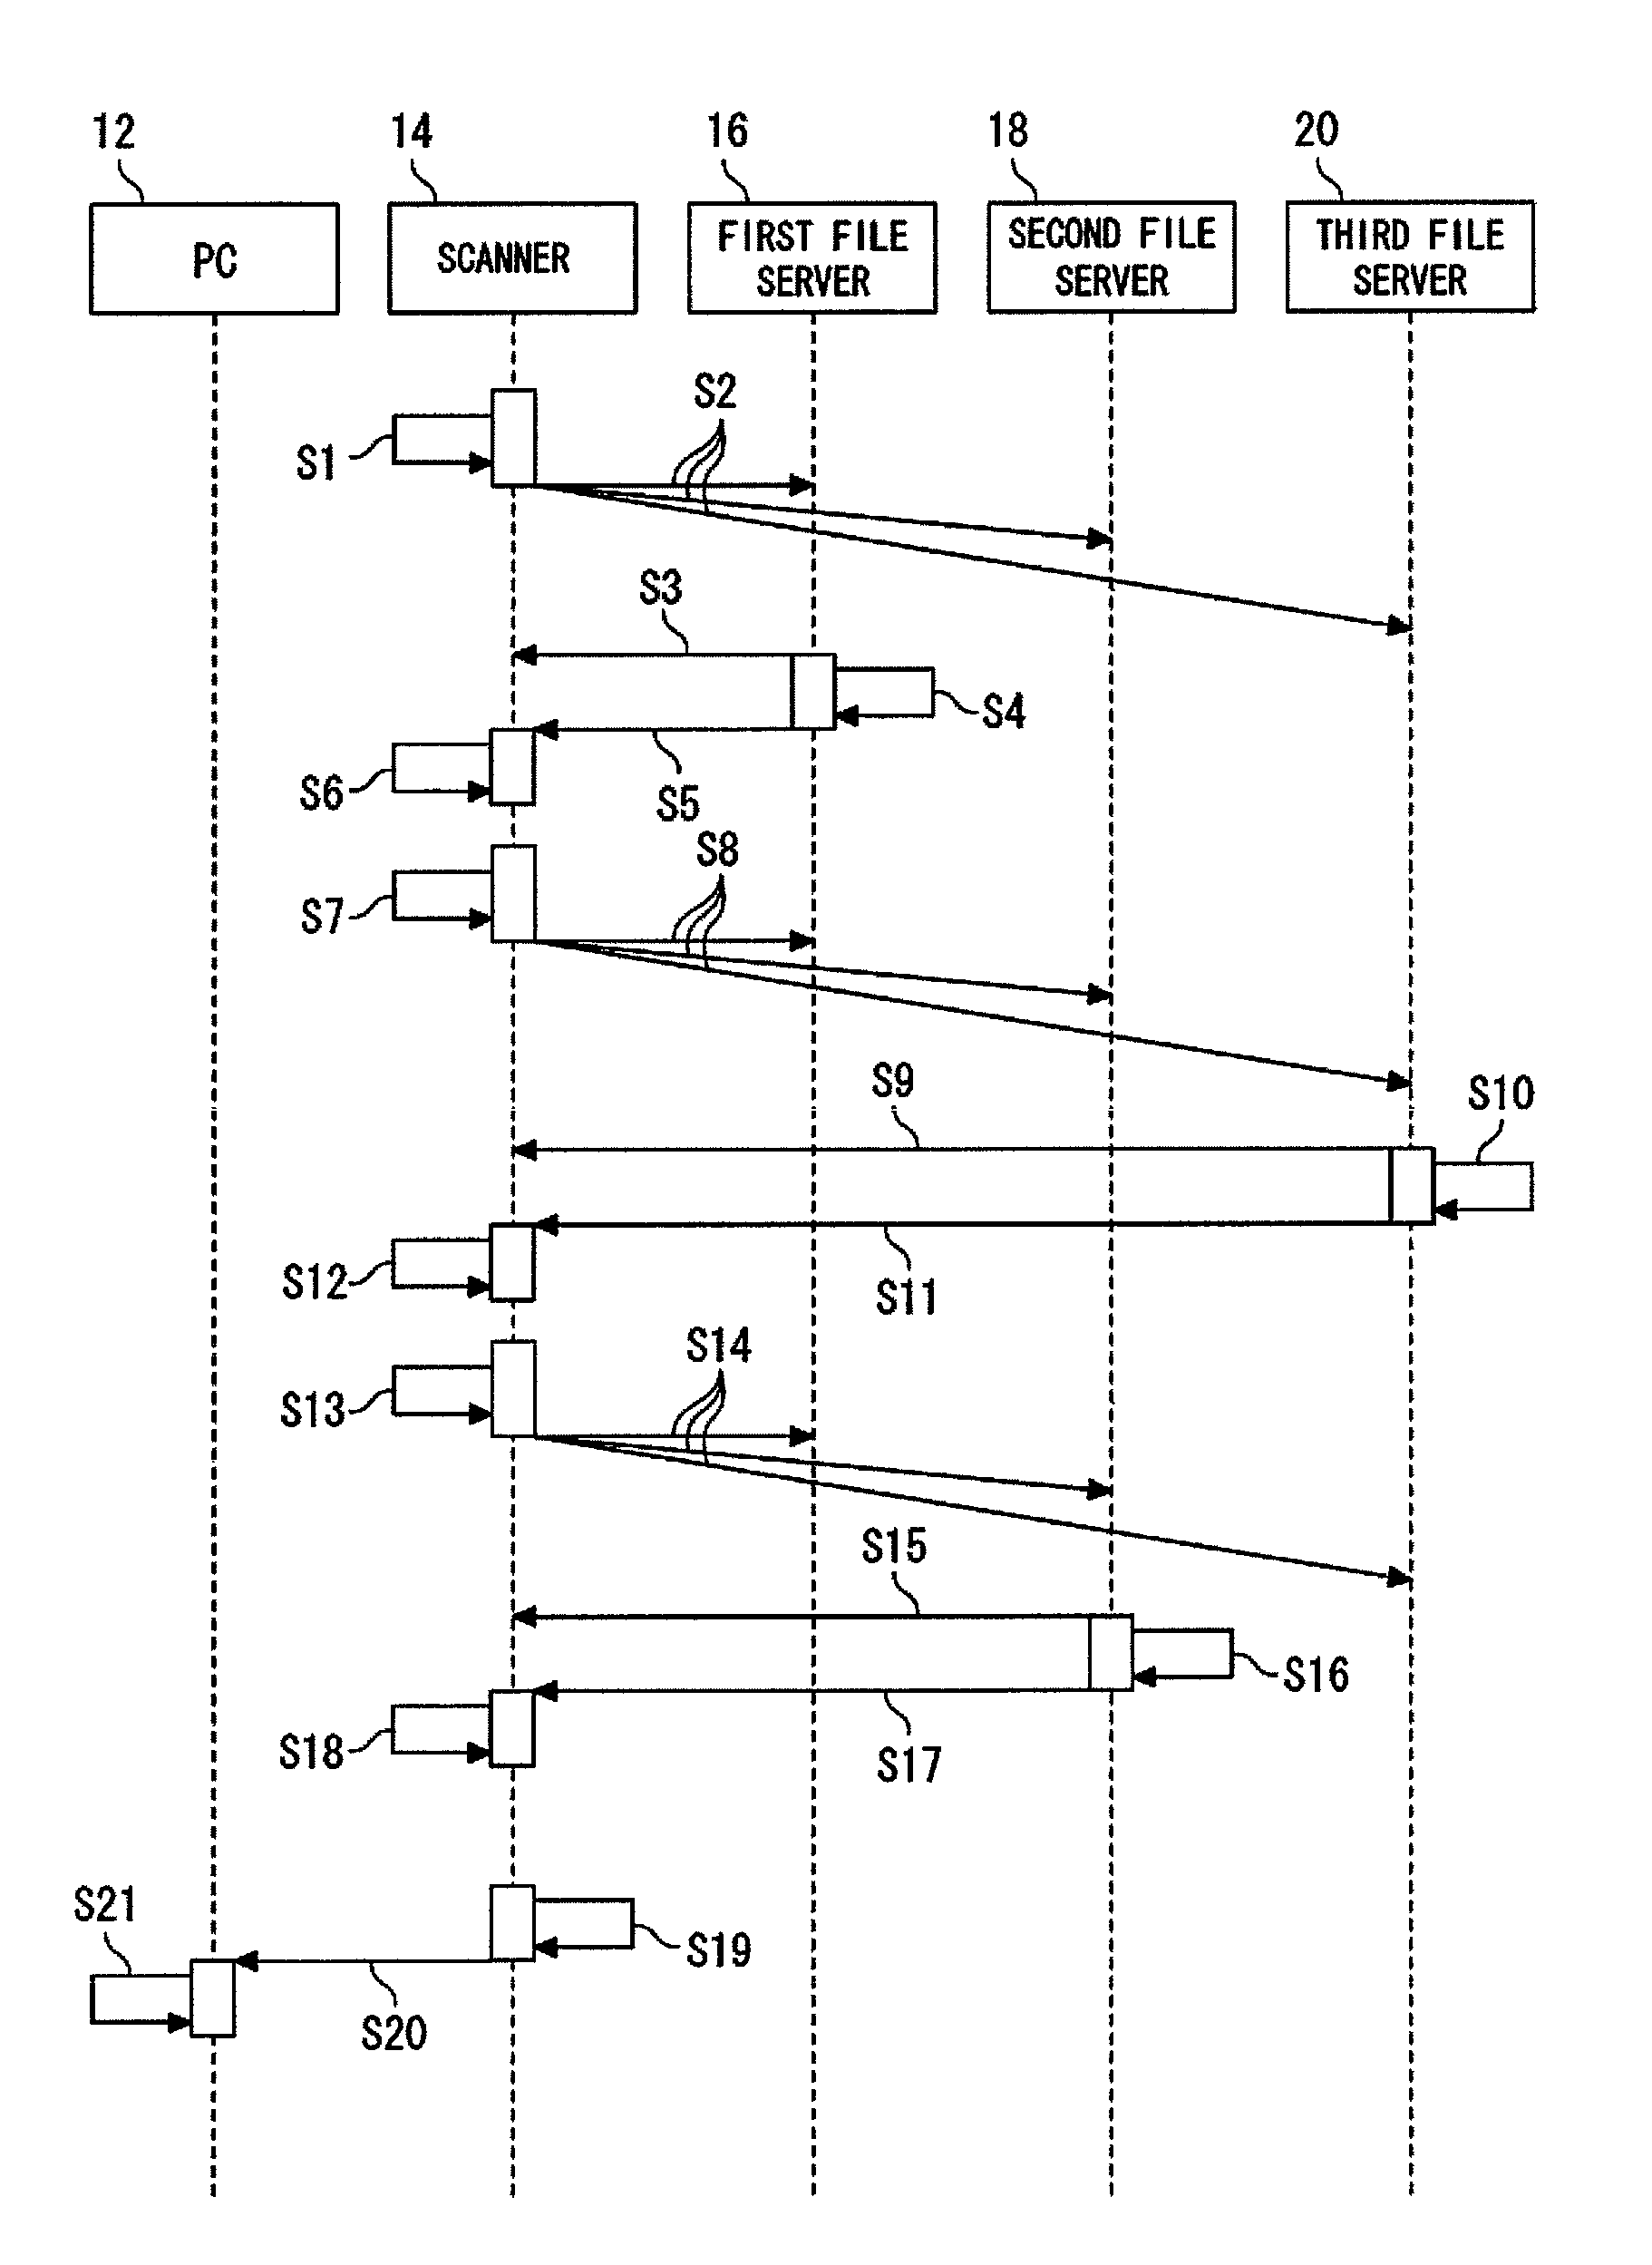 Network file processing system for sending multicast acceptance requests for transmission of image data via a network